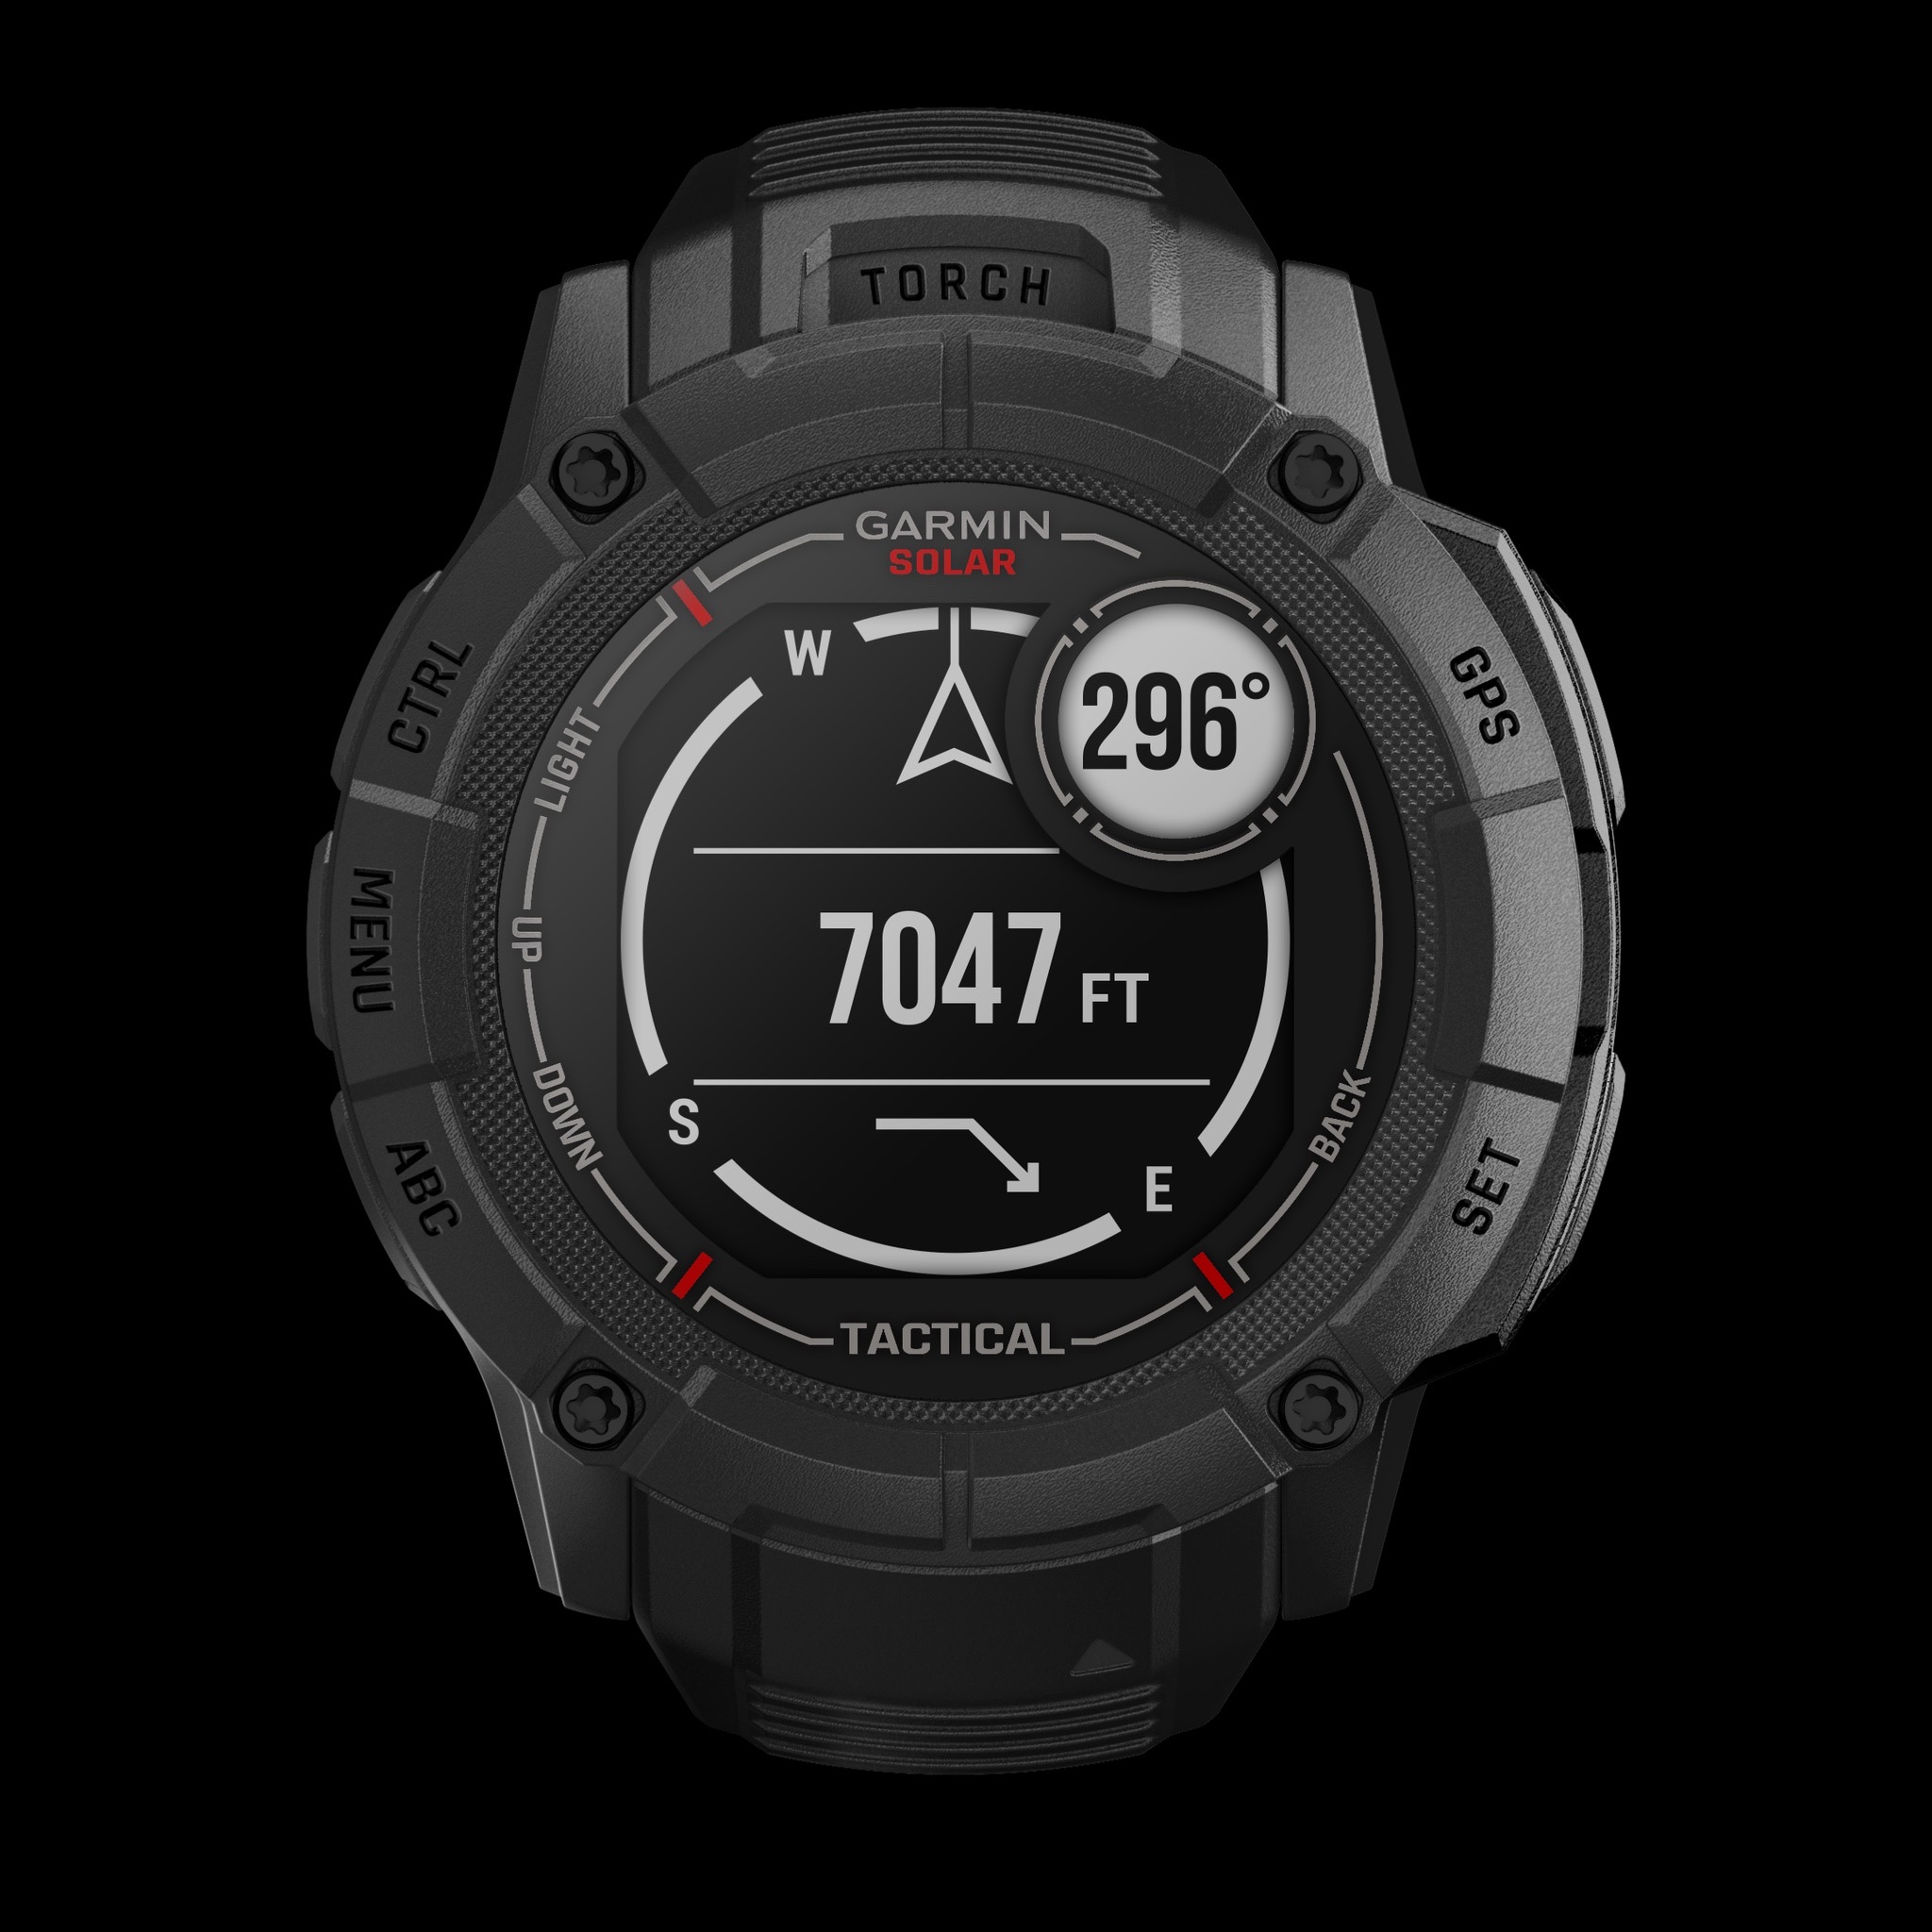 Garmin Launches Lifestyle GPS Watch: Garmin launches its first-ever  Lifestyle GPS Watch 'Instinct' in India, priced at Rs 26,990 - Times of  India